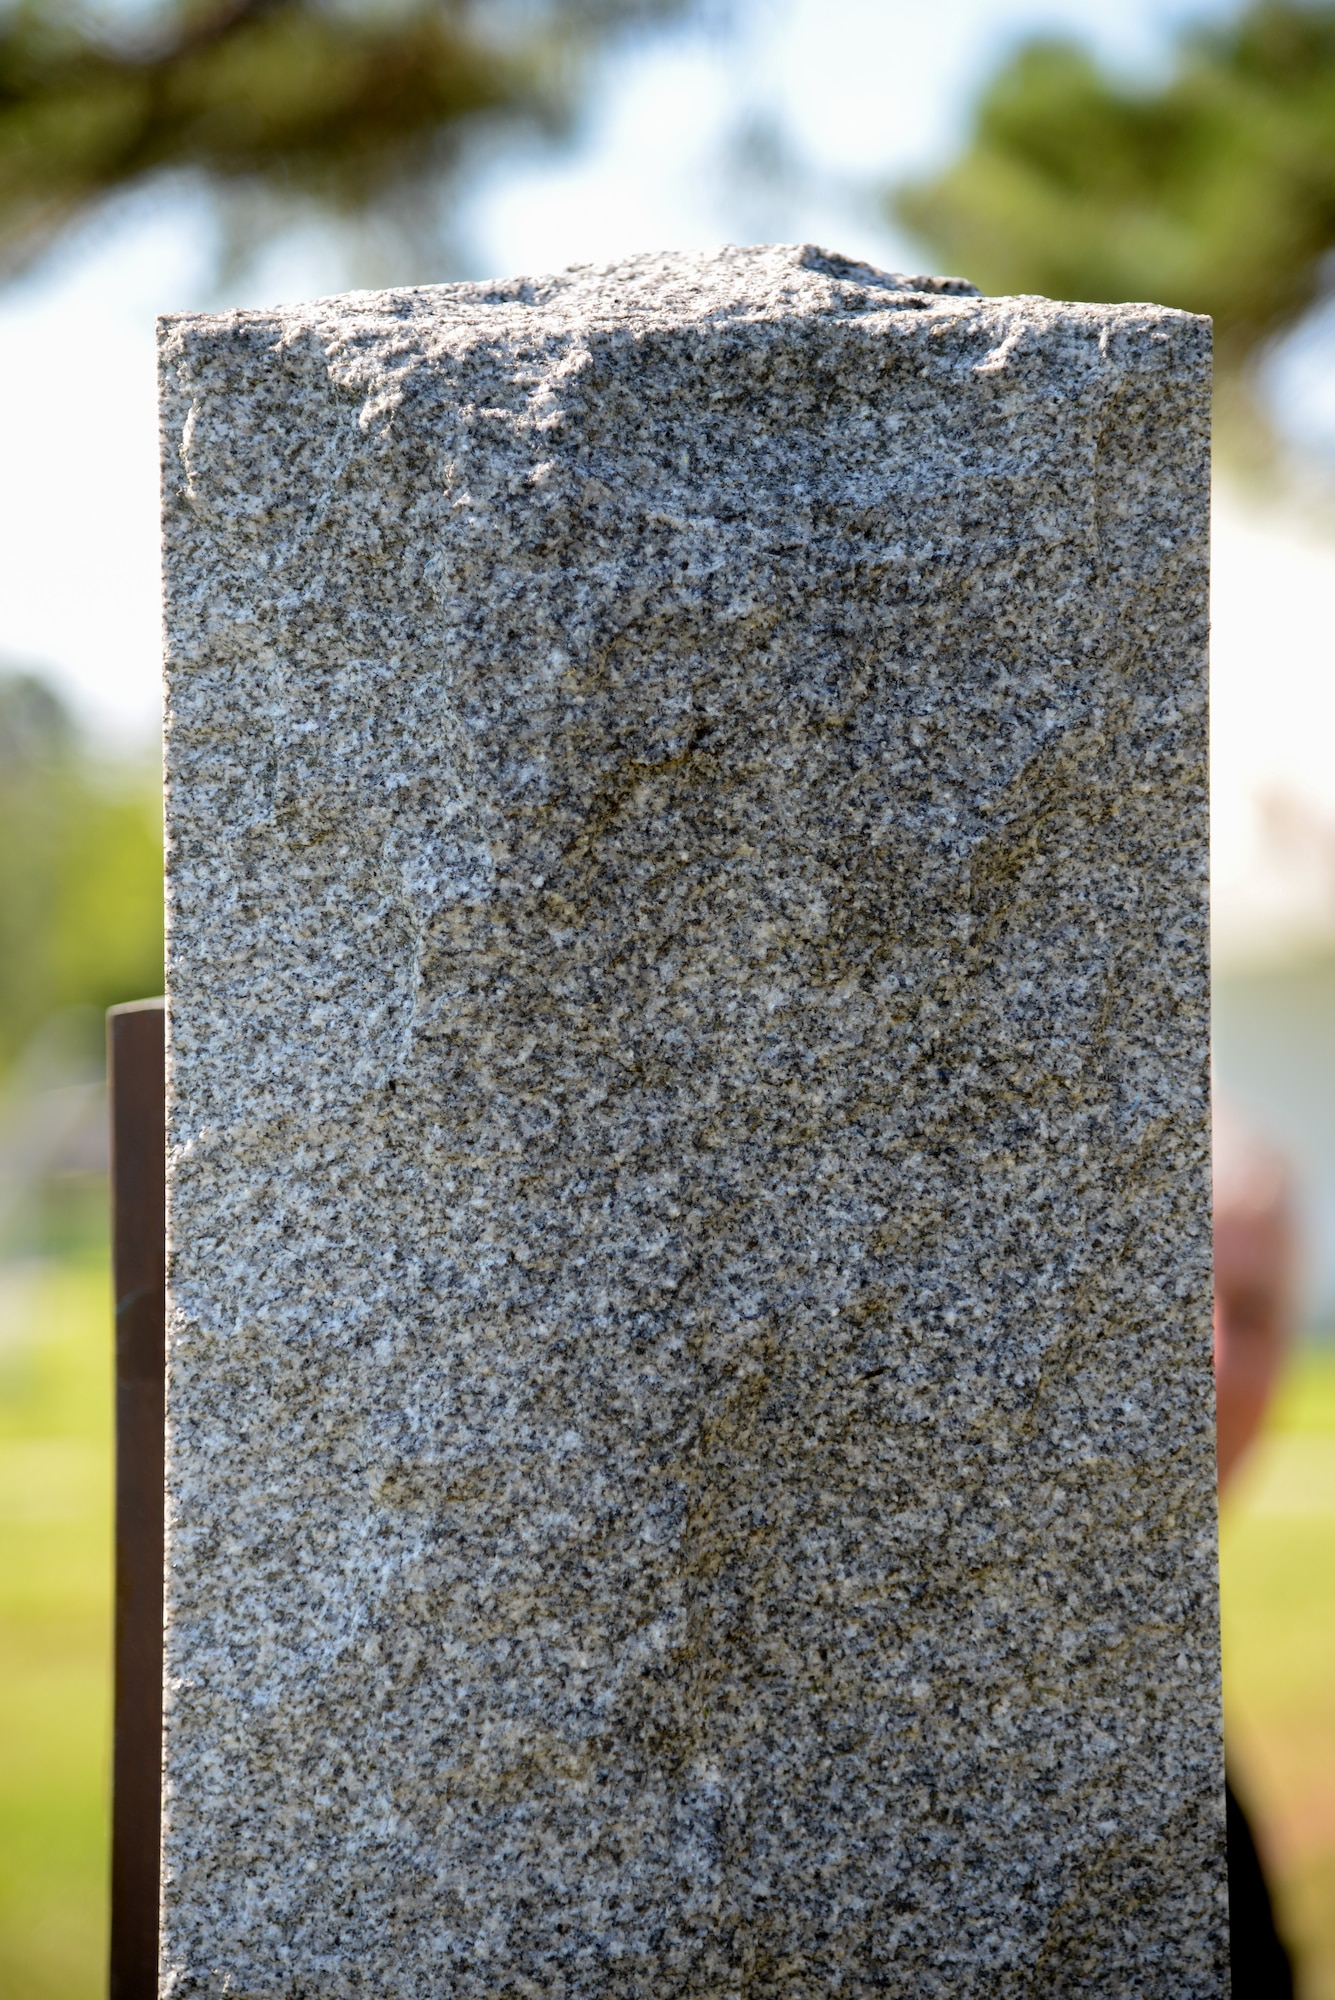 A picture of a freshly cleaned and polished U.S. Navy VC-4 memorial marker.